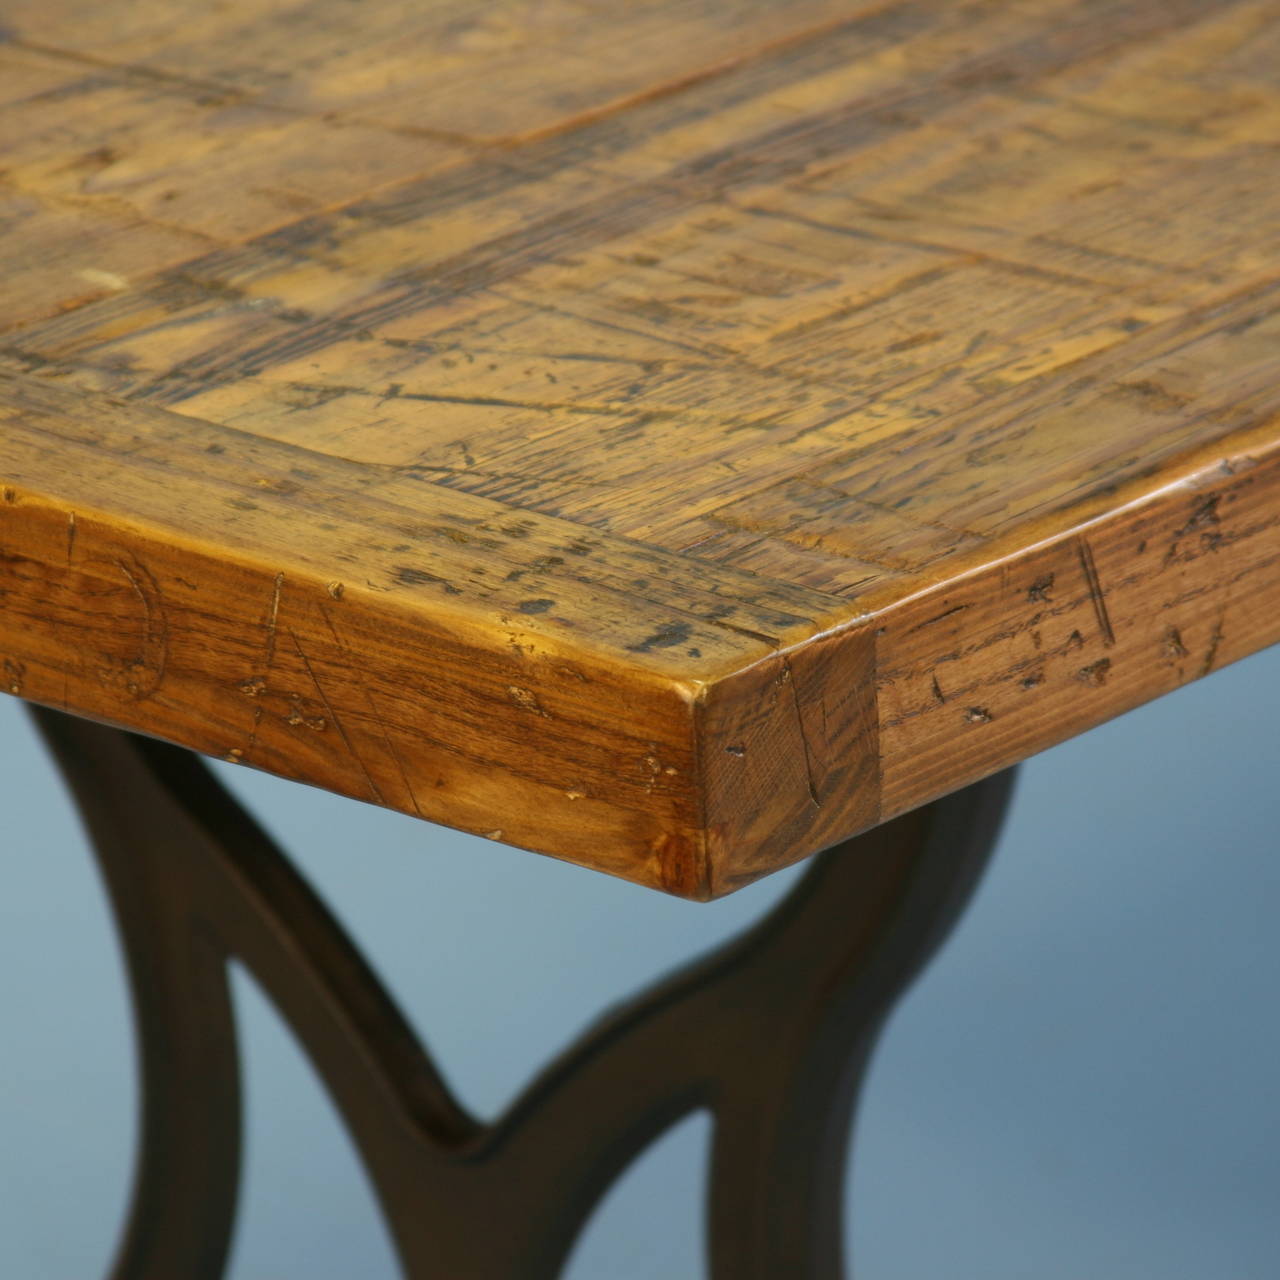 American Large Vintage Industrial Style Table, Iron Legs & Reclaimed Wood Top, circa 1920